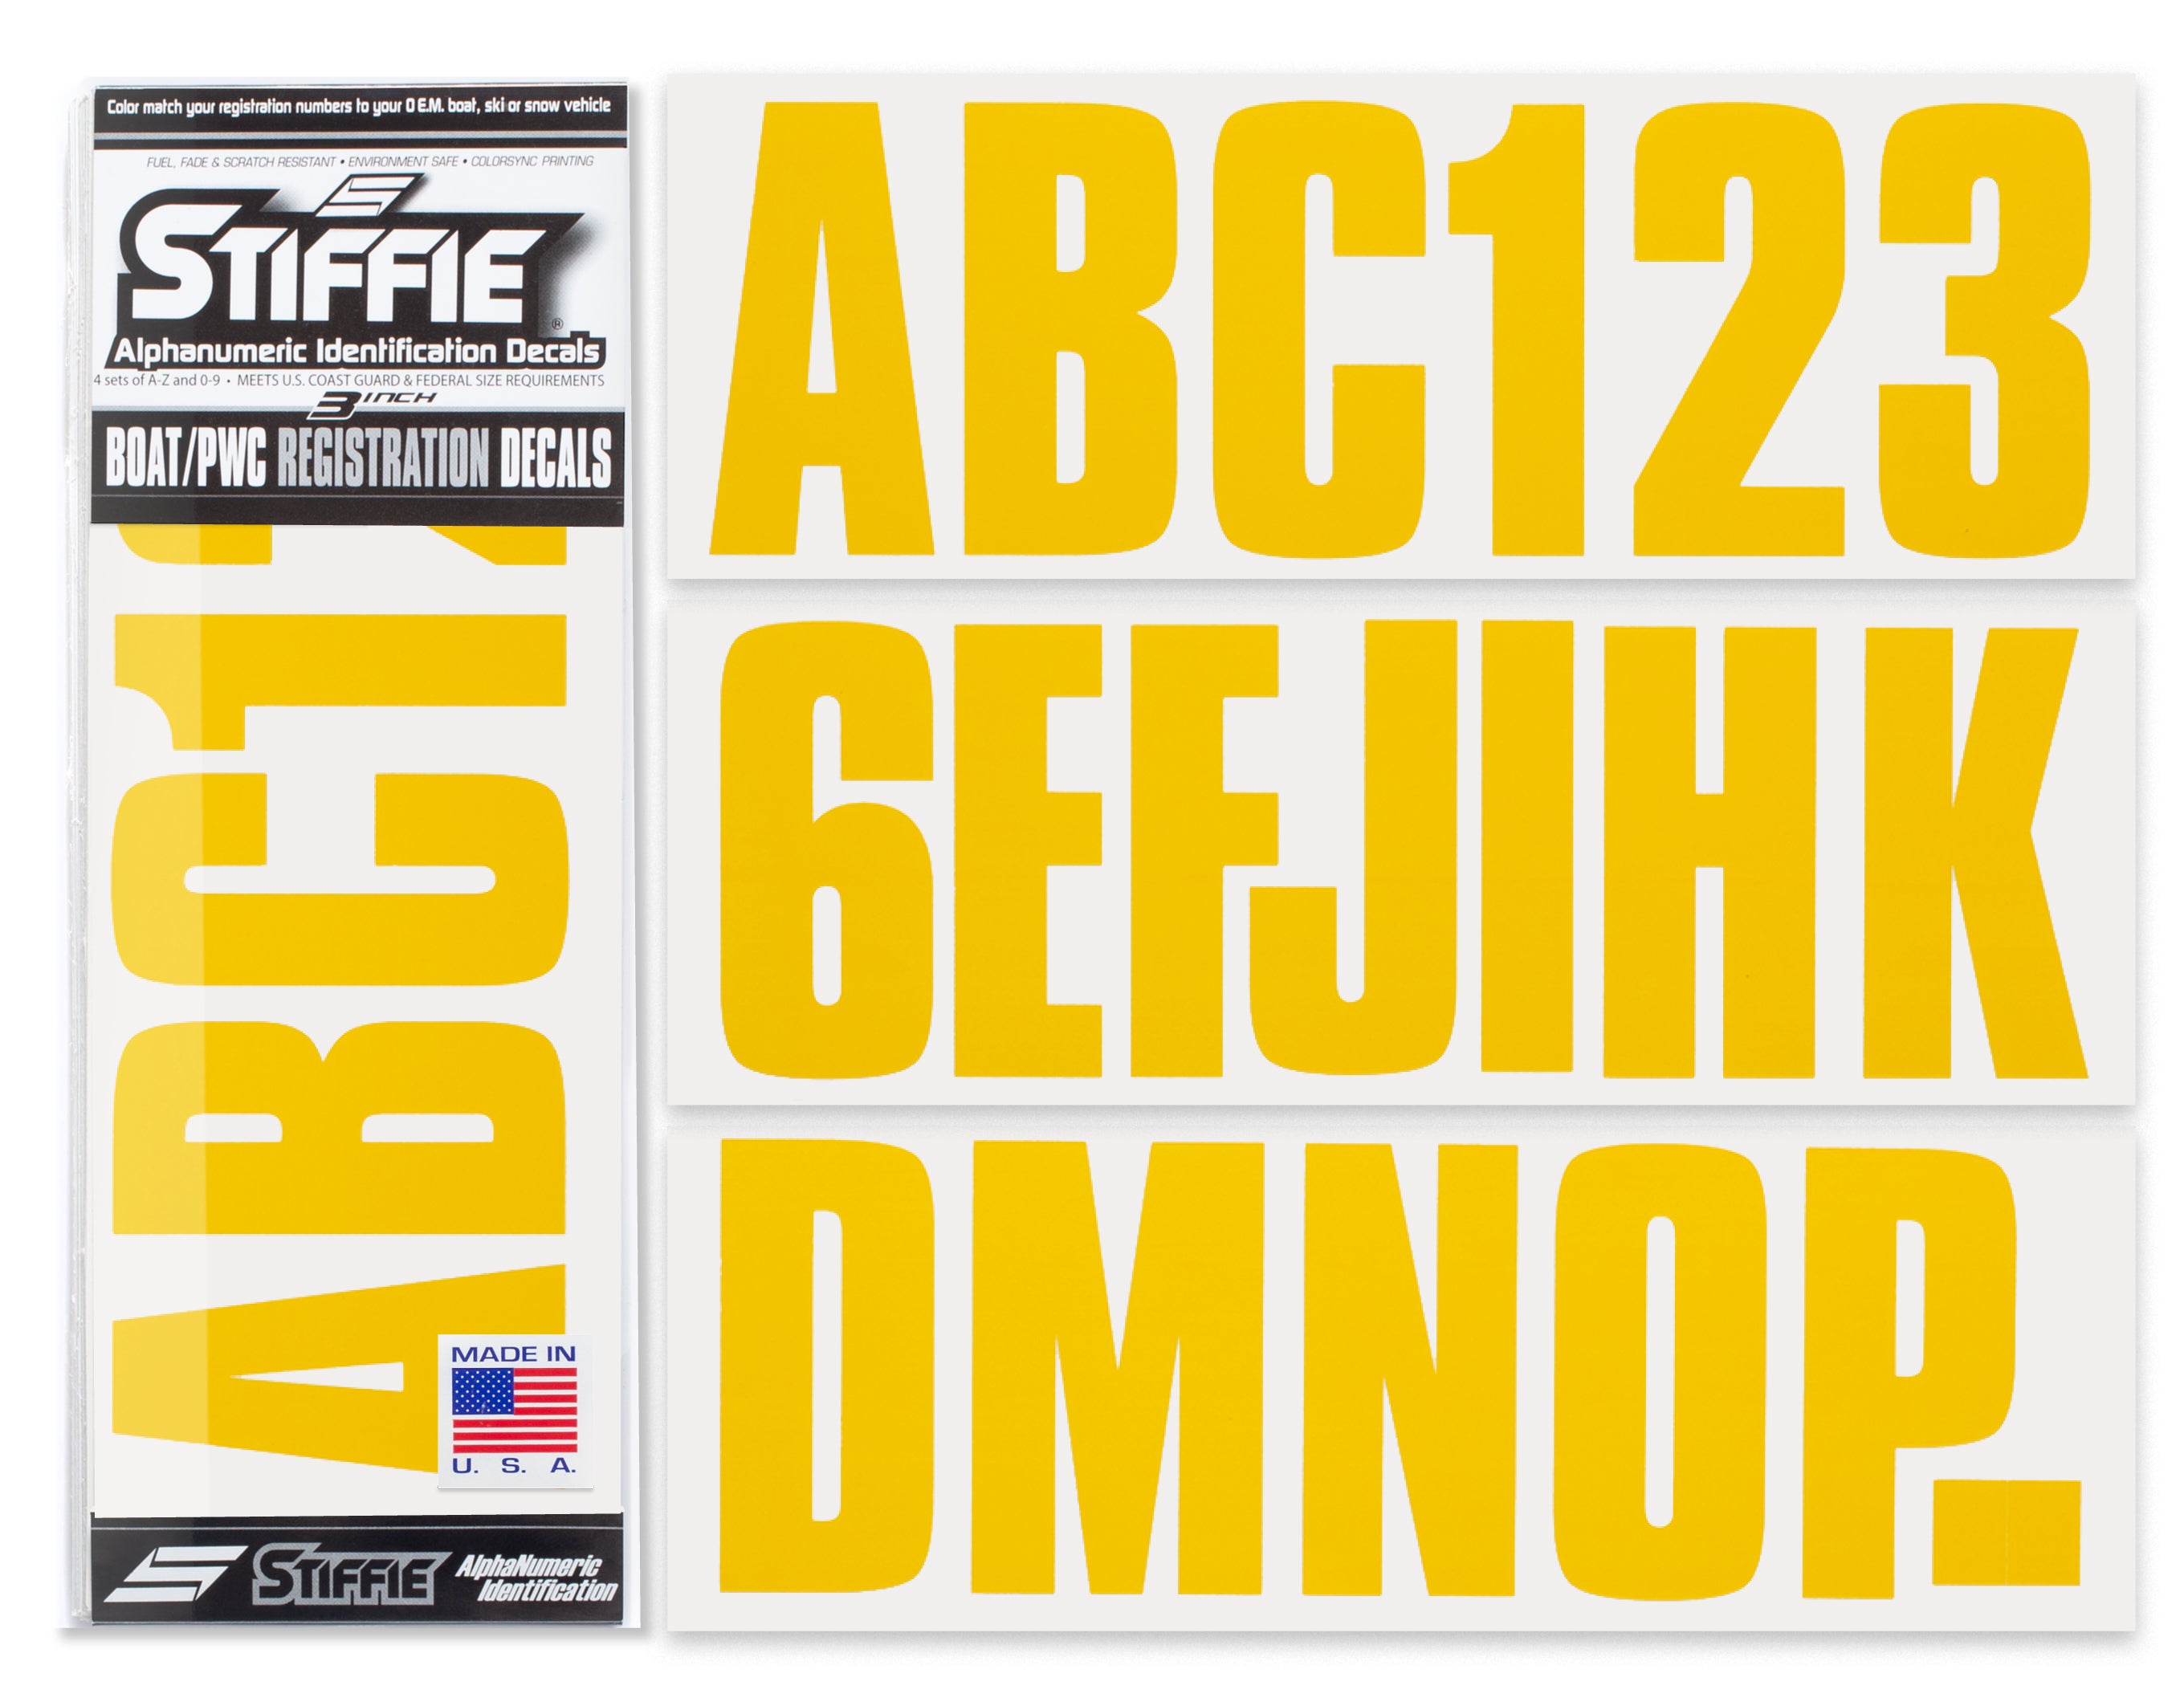 STIFFIE Uniline Sun Gold 3" ID Kit Alpha-Numeric Registration Identification Numbers Stickers Decals for Boats & Personal Watercraft